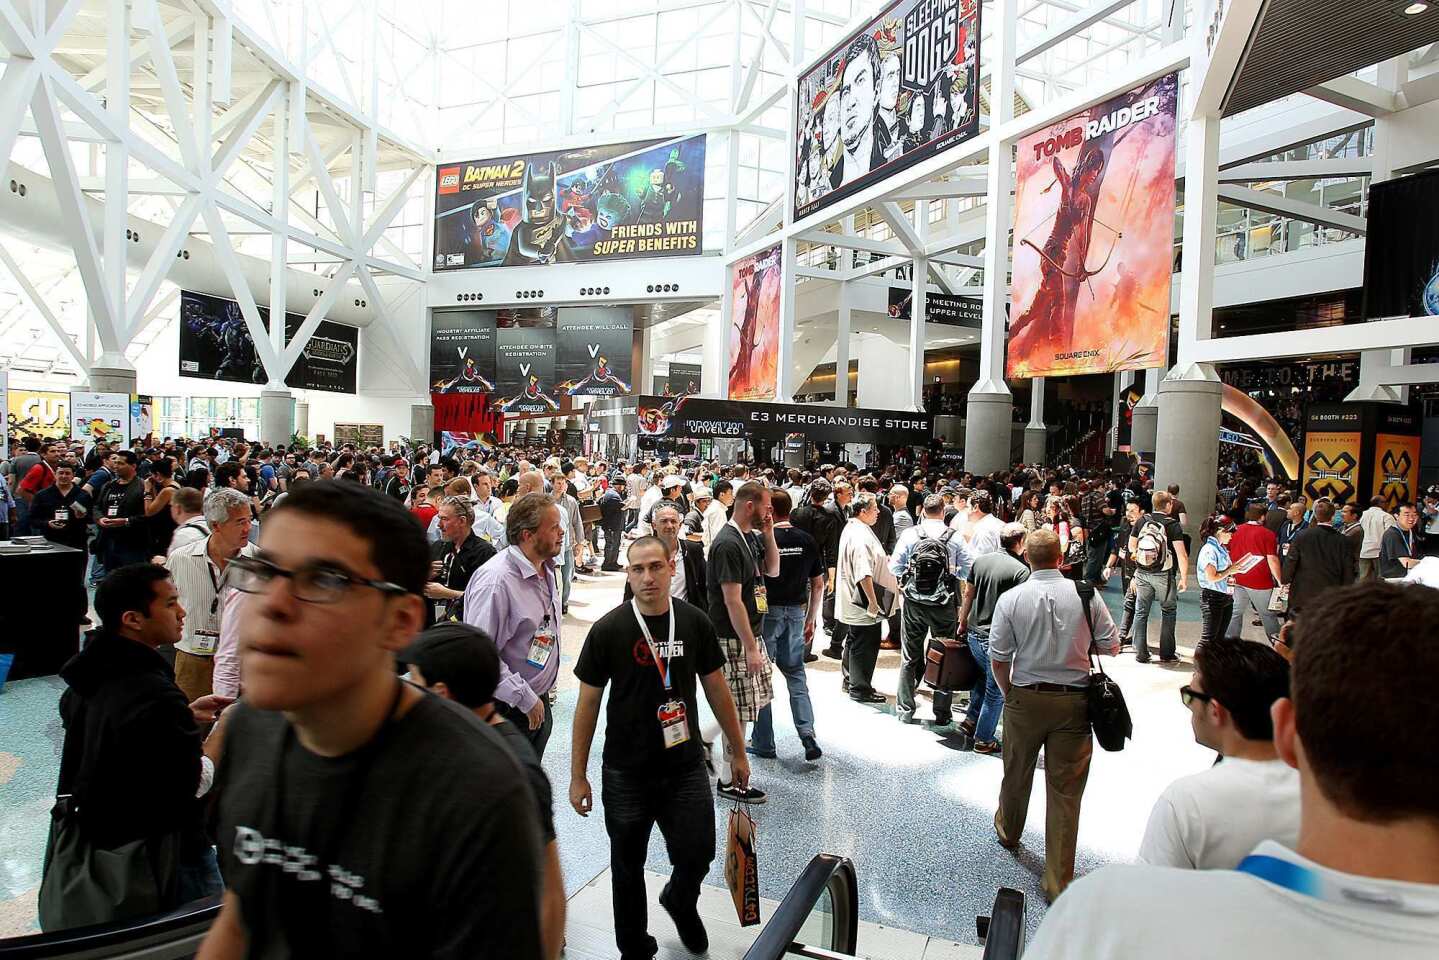 Video game fans fill the Los Angeles Convention Center for the E3 convention in 2012.